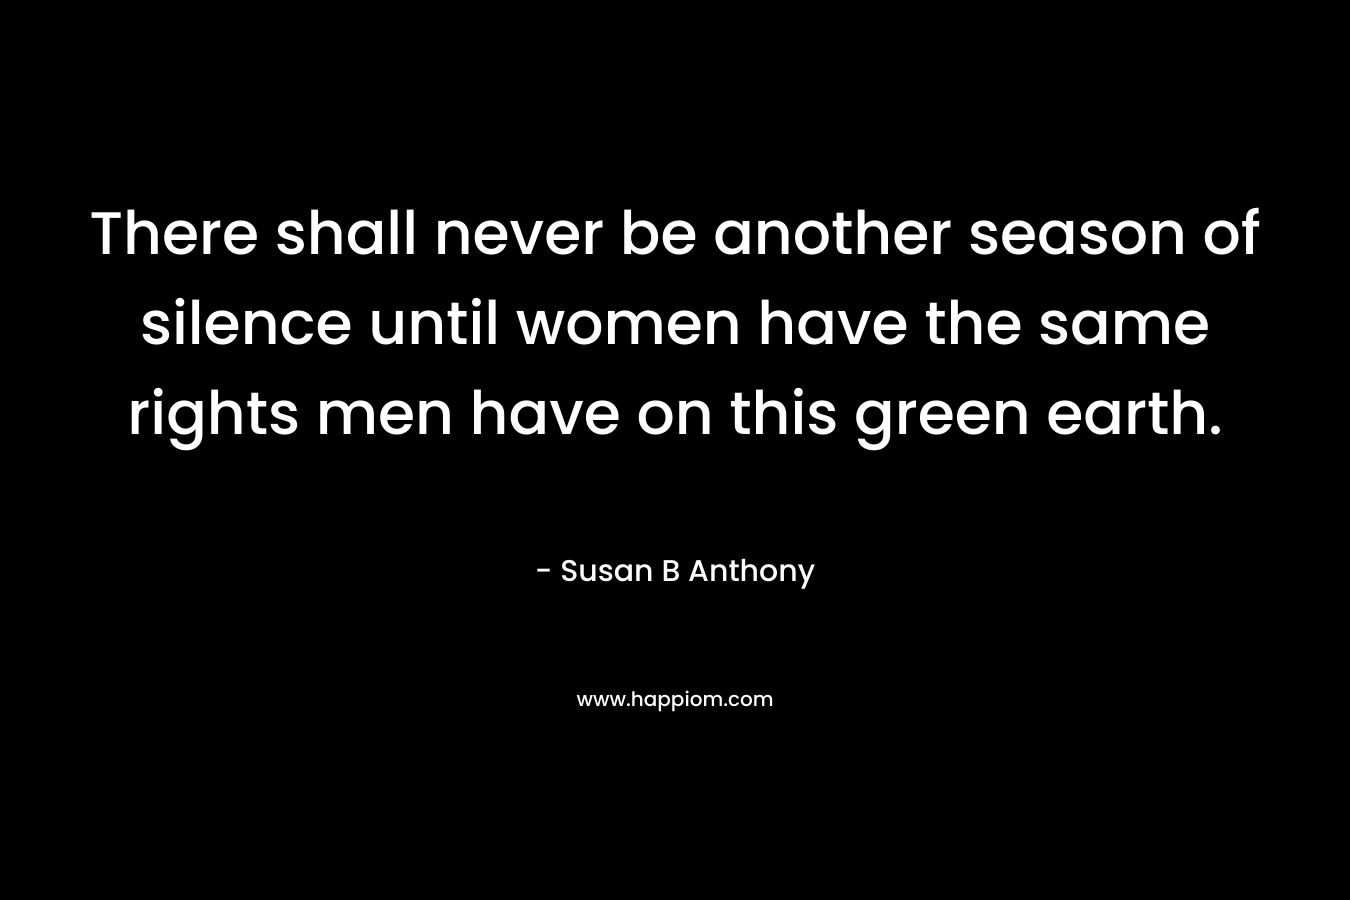 There shall never be another season of silence until women have the same rights men have on this green earth.